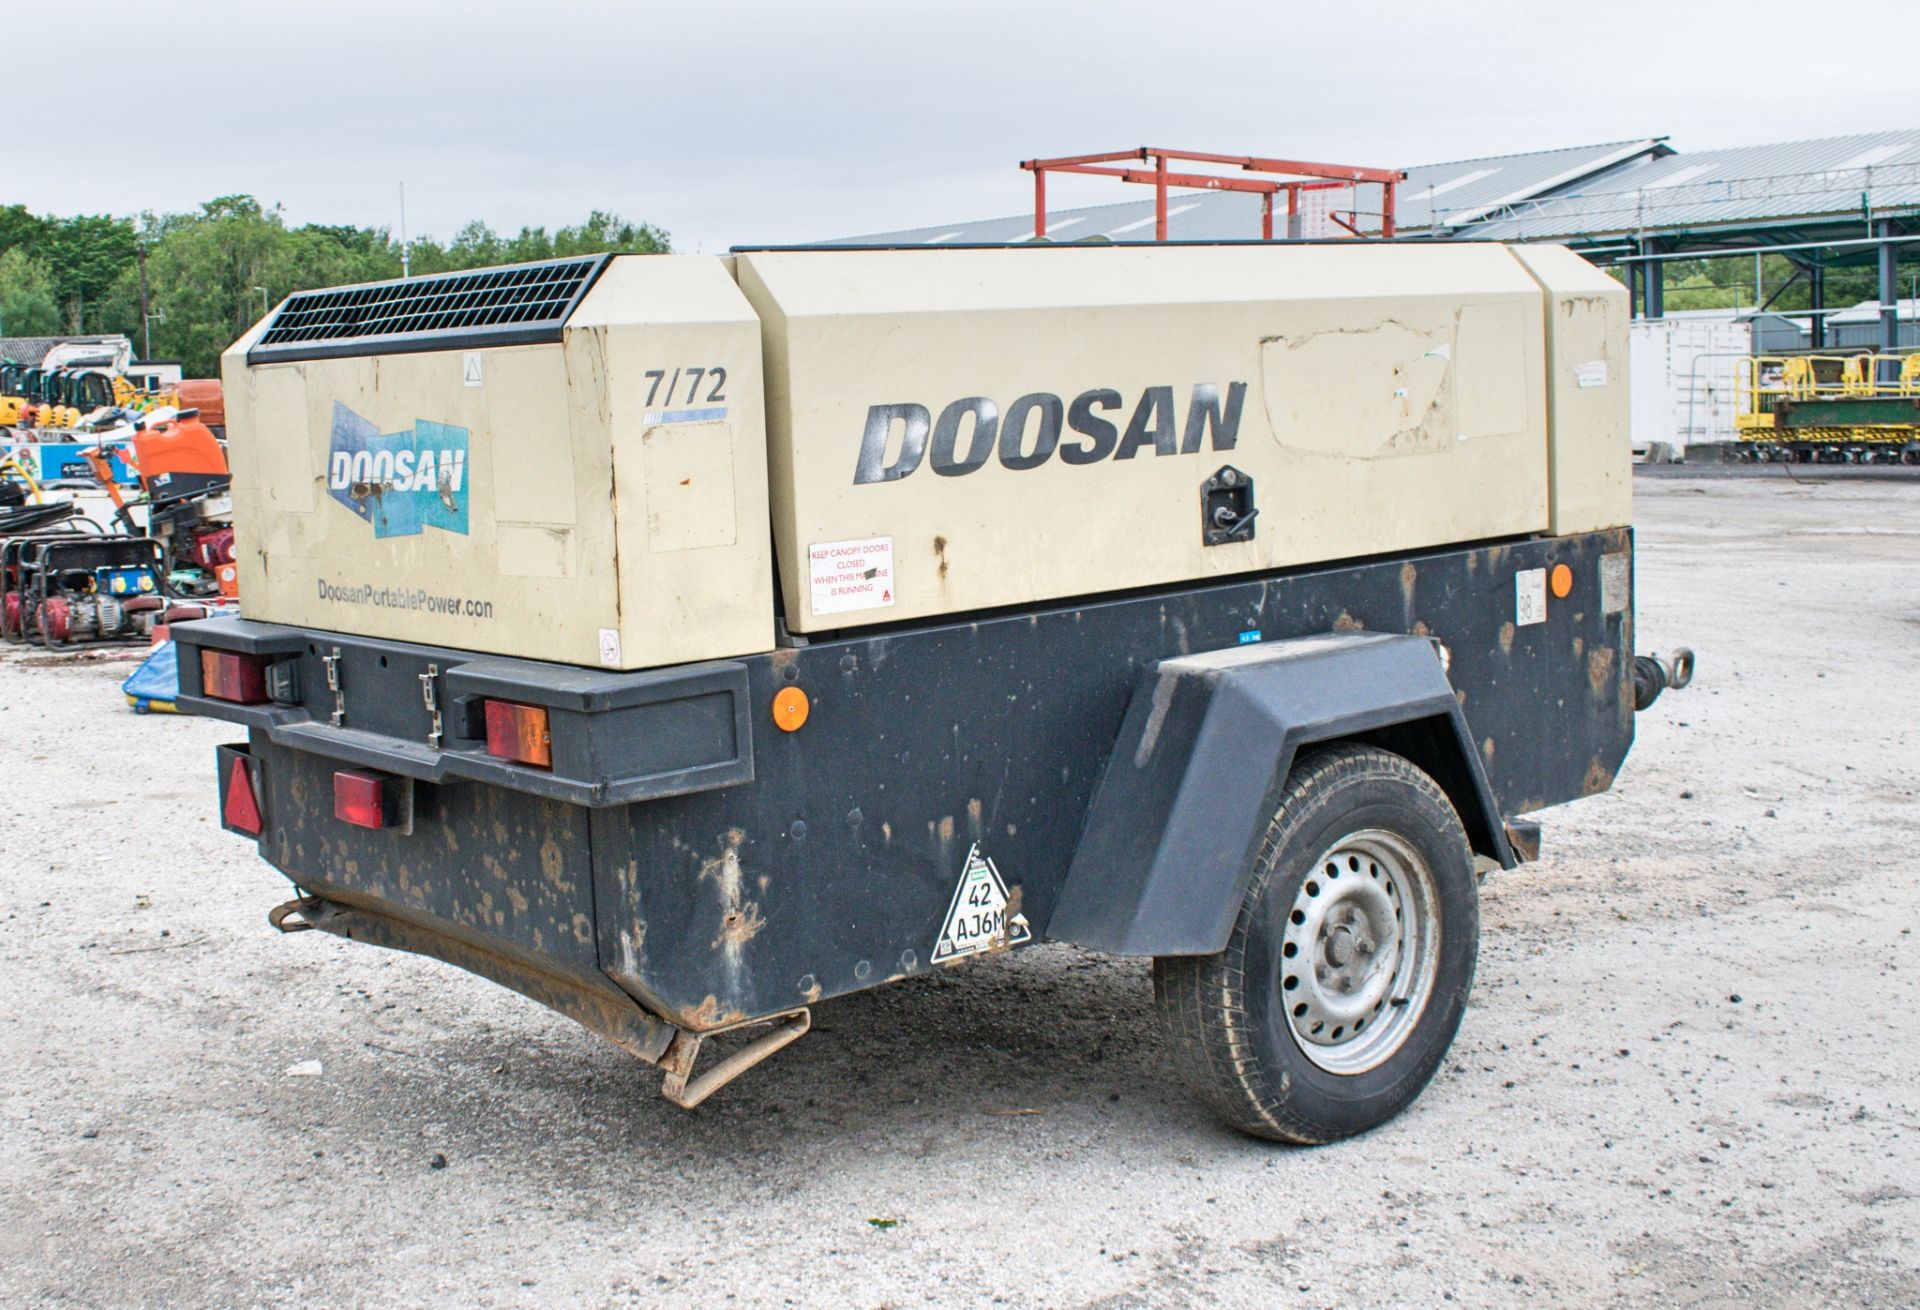 Doosan 7/72 260 cfm diesel driven fast tow air compressor Year: 2014 S/N: S42115 Recorded Hours: 711 - Image 2 of 7